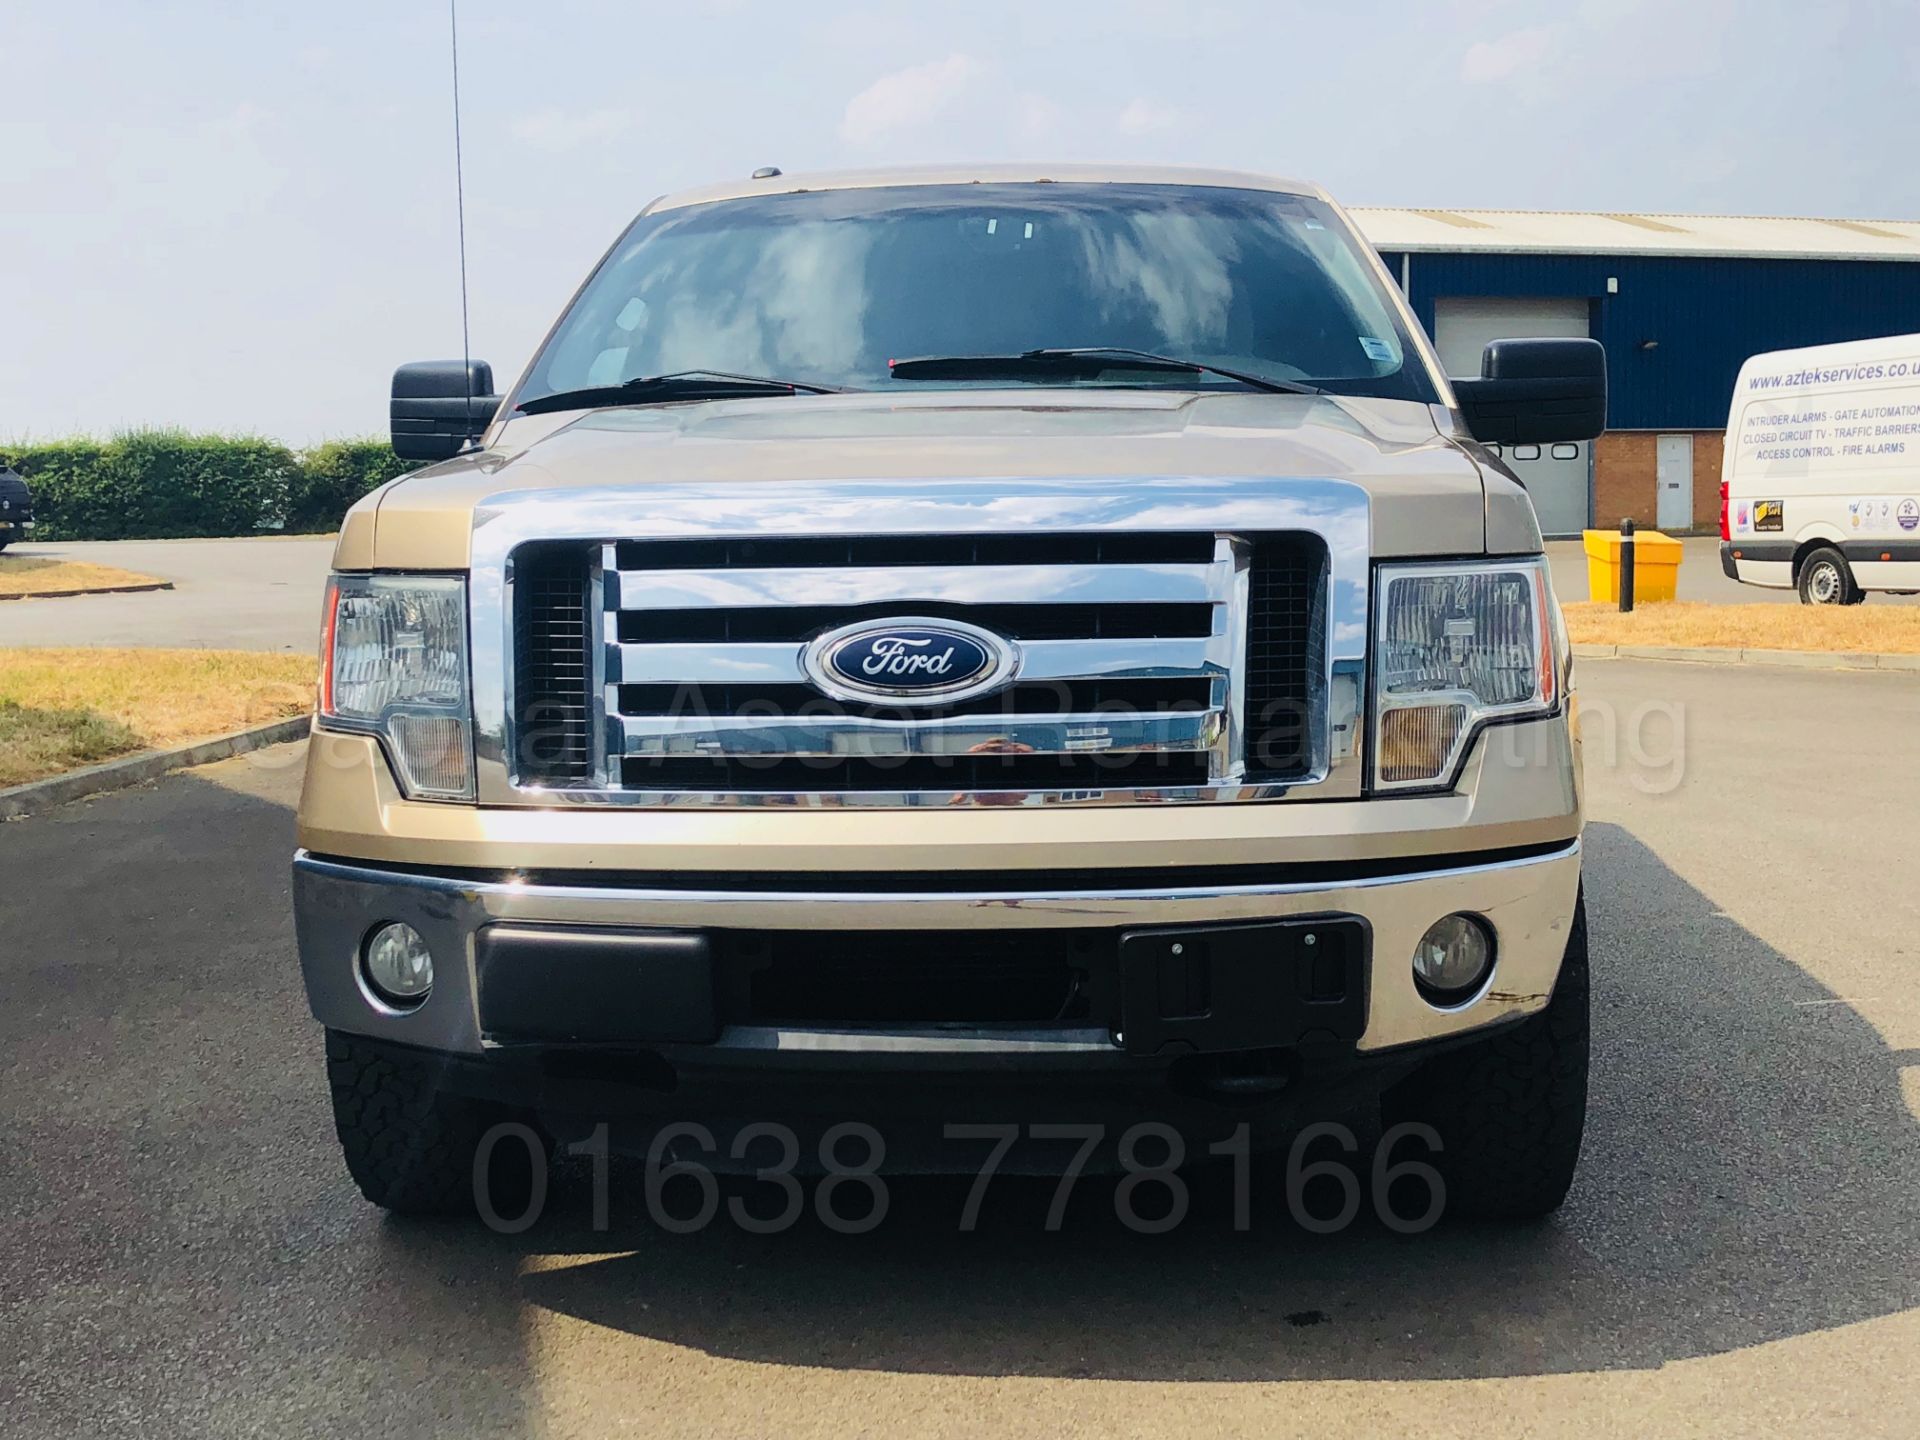 (On Sale) FORD F-150 5.4 V8 XLT EDITION KING-CAB (2012) MODEL**4X4**6 SEATER**AUTOMATIC *TOP SPEC* - Image 9 of 52